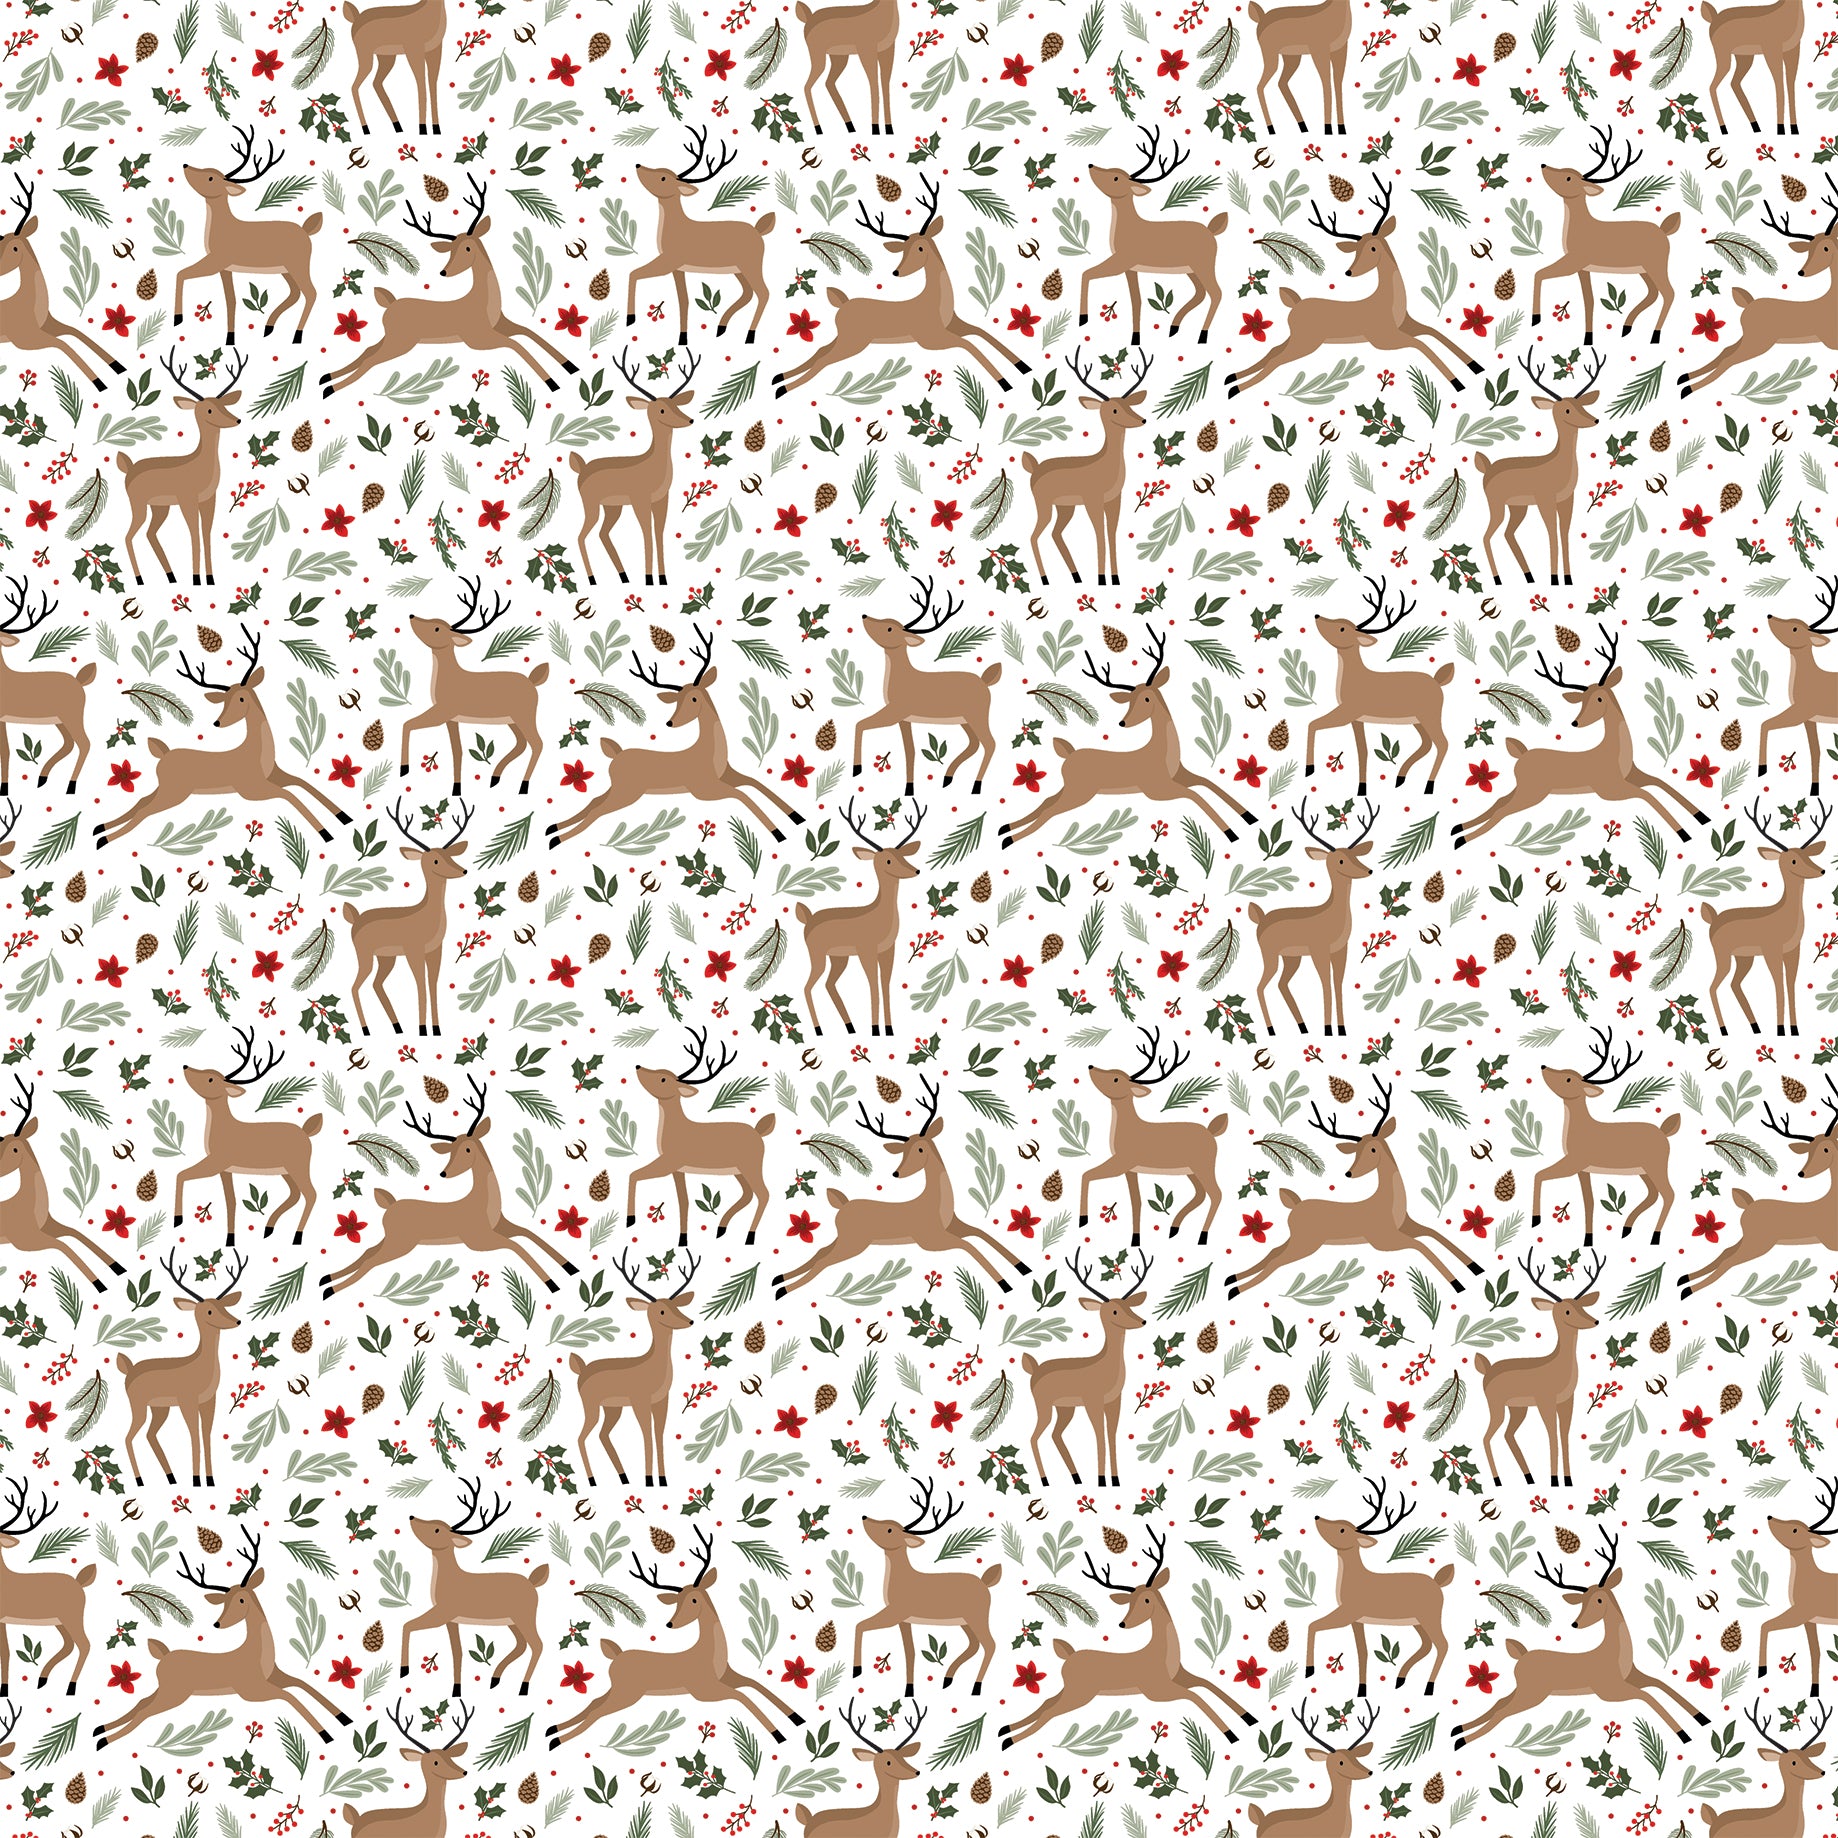 Christmas Time Collection Oh Deer 12 x 12 Double-Sided Scrapbook Paper by Echo Park Paper